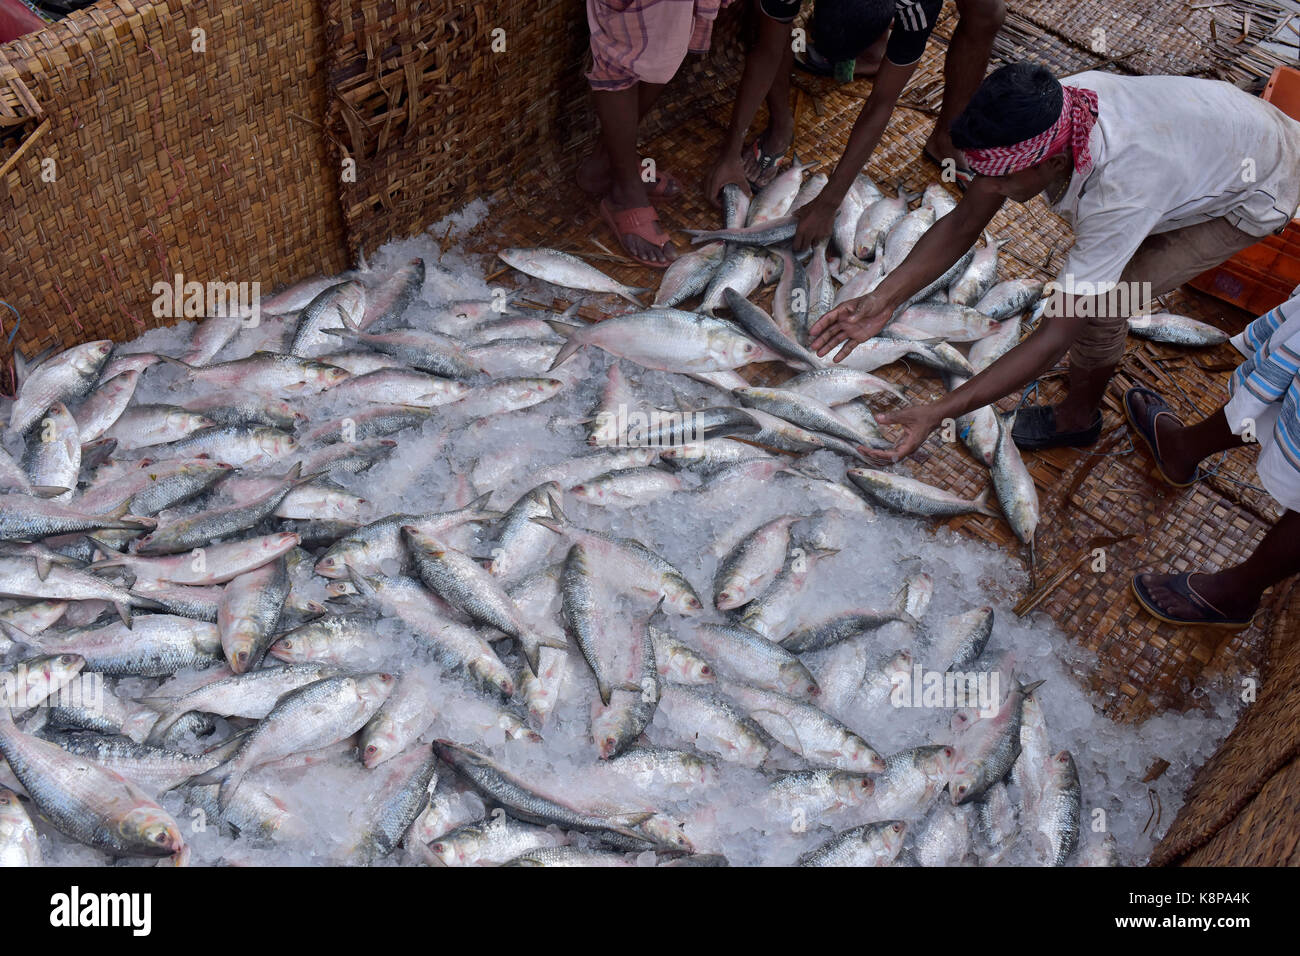 DHAKA, BANGLADESH – SEPTEMBER 20, 2017: A Bangladeshi worker loads Hilsa fish on a truck at Kawran Bazar, in Dhaka, Bangladesh, September 20, 2017. Tenualosa ilisha (ilish, hilsa, hilsa herring, or hilsa shad) is a species of fish in the herring family, and a popular food fish in South Asia. The fish contributes about 12% of the total fish production and about 1% of GDP in Bangladesh. About 450,000 people are directly involved with the catching for livelihood; around four to five million people are indirectly involved with the trade. Stock Photo